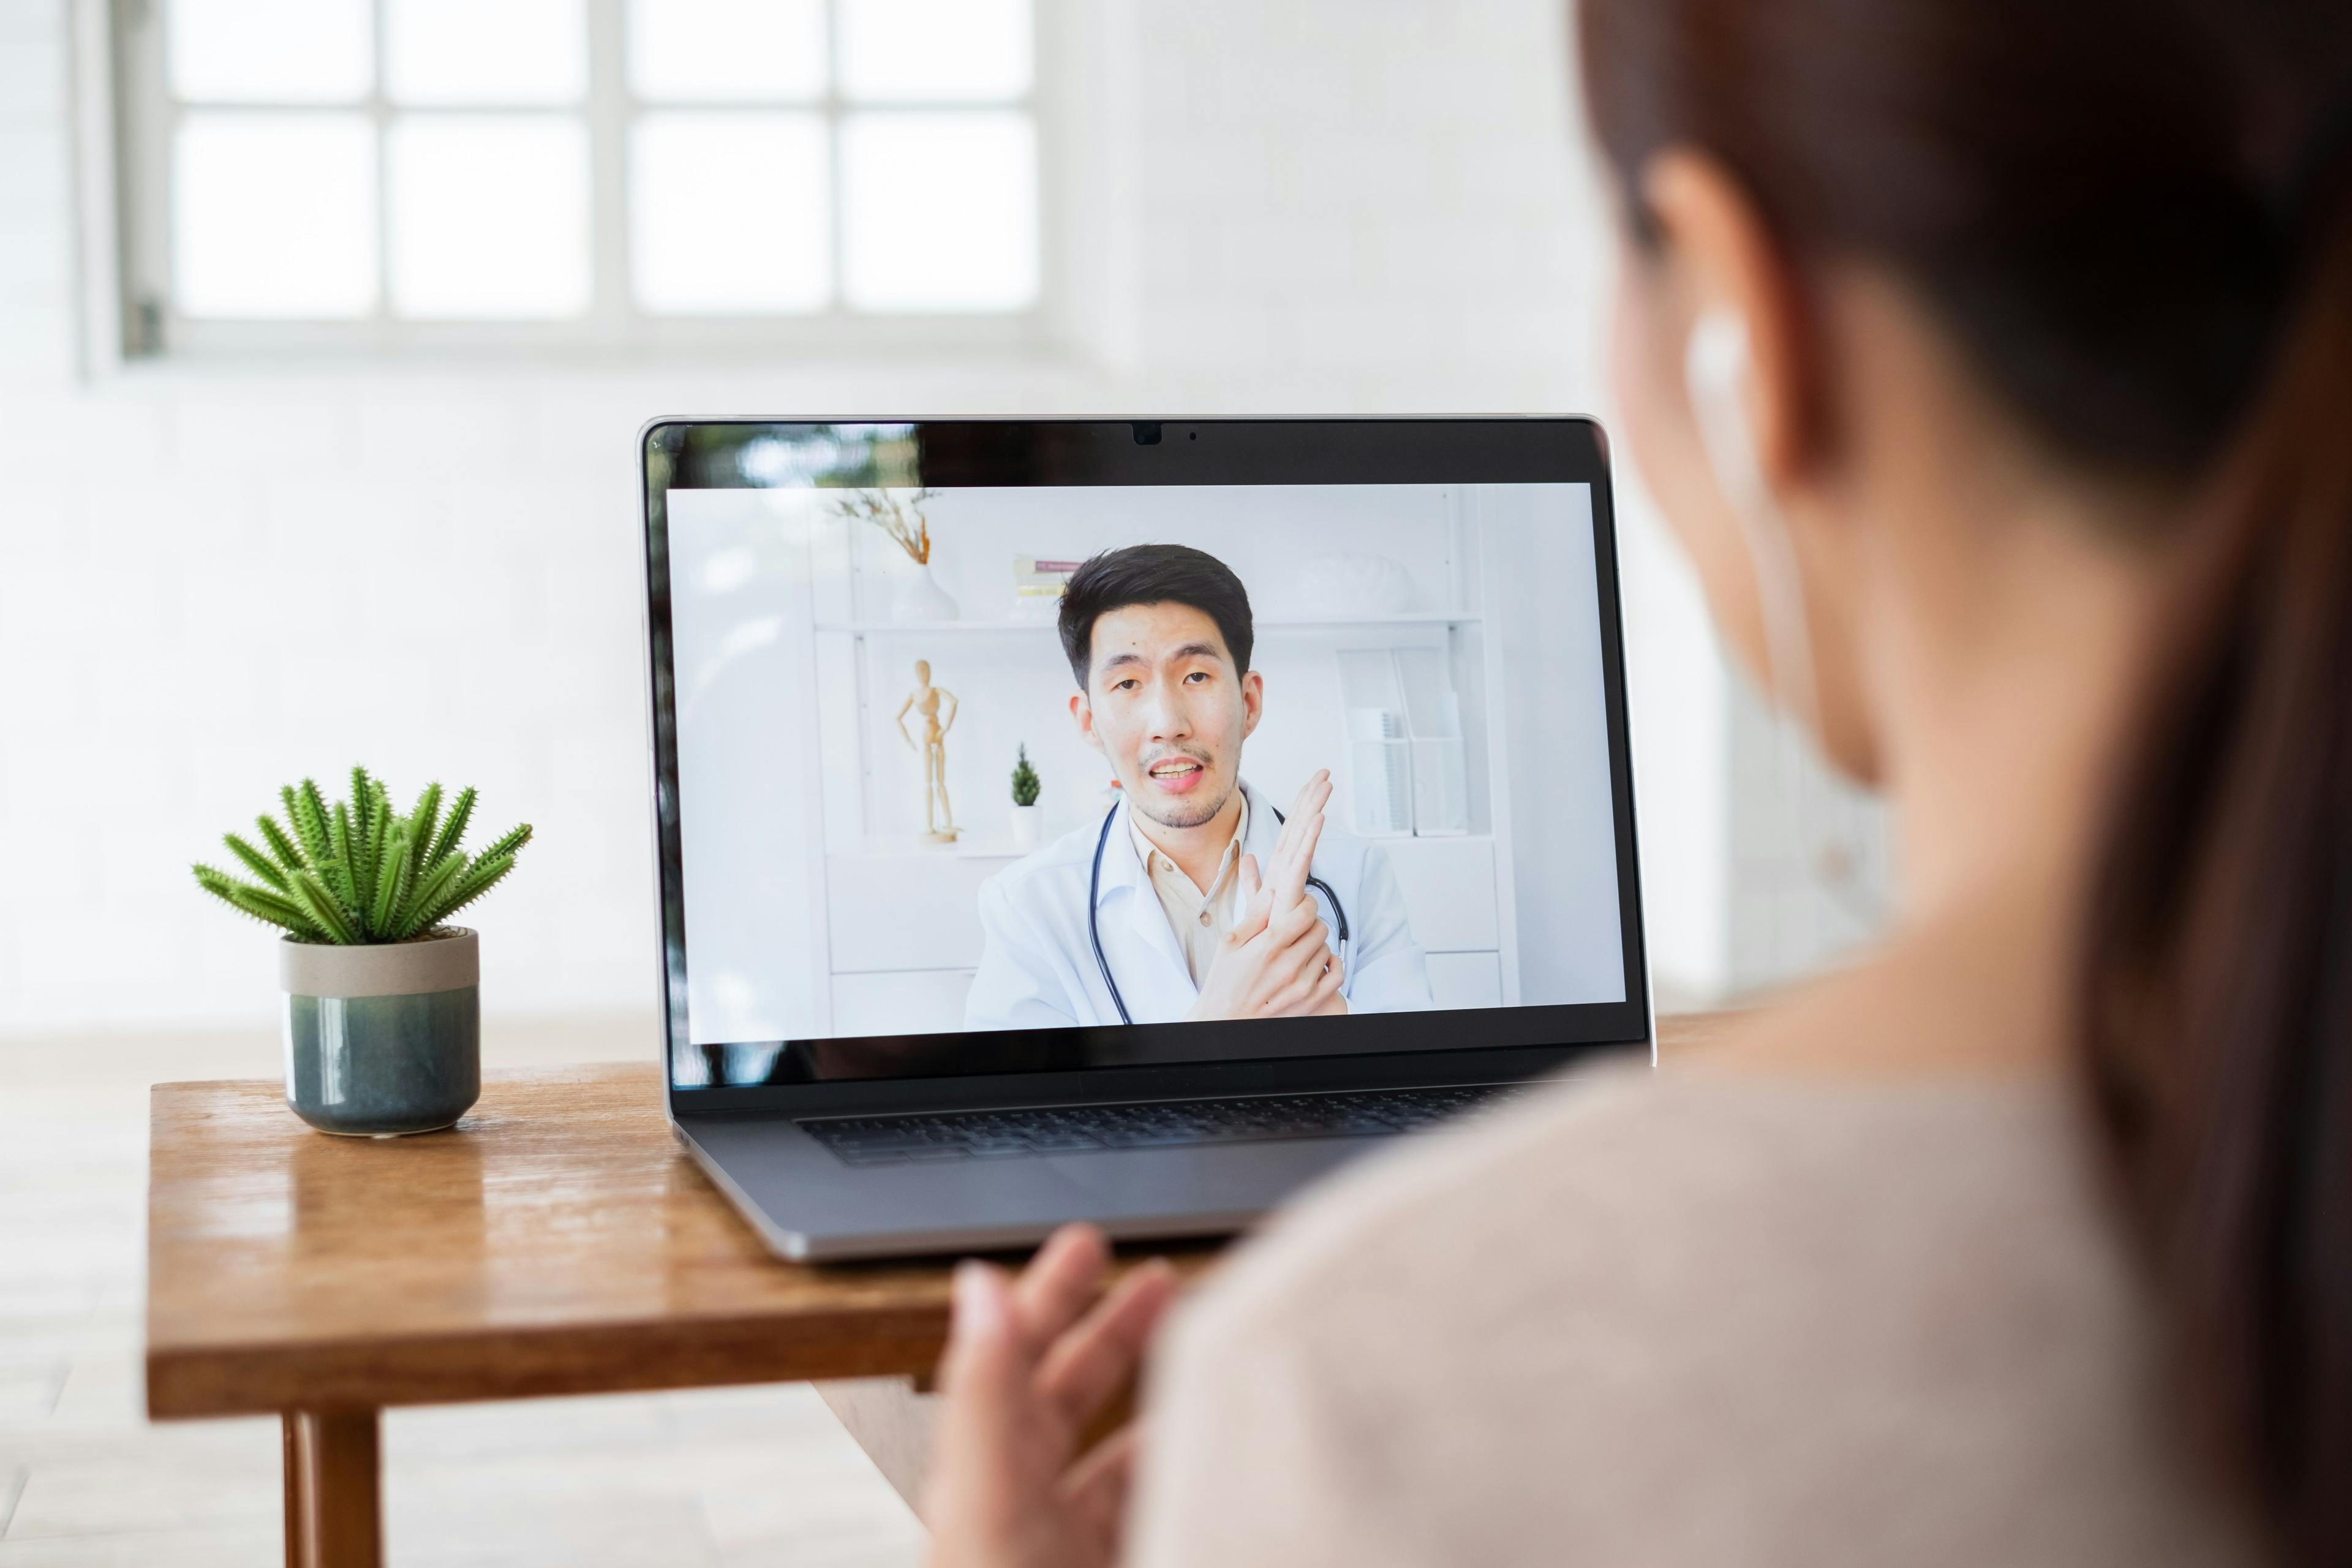 Telehealth providers aren’t more likely to prescribe ADHD drugs, study finds 